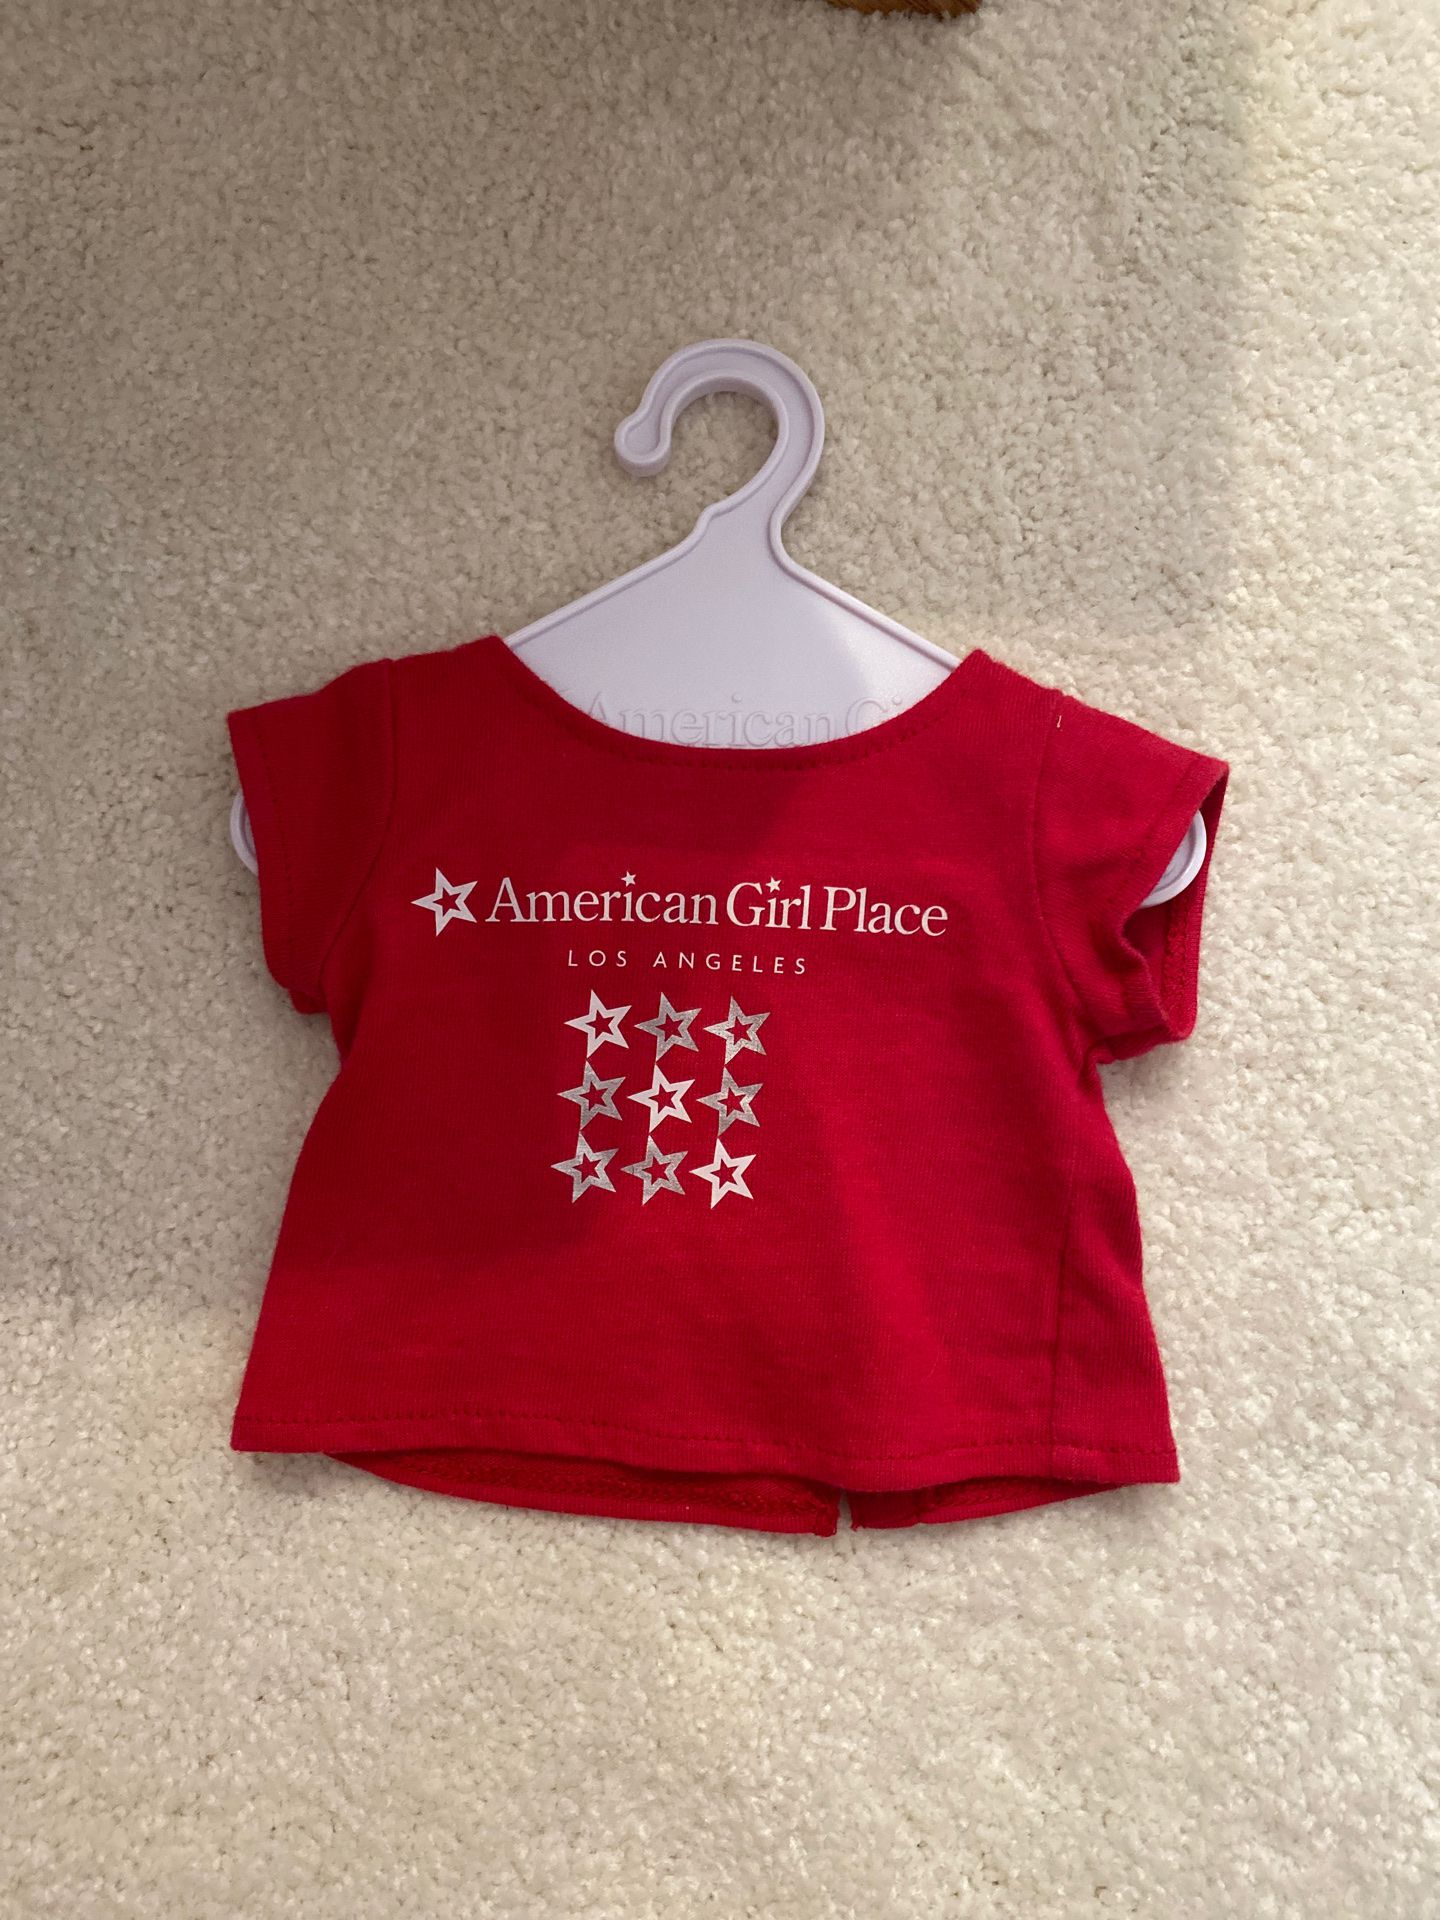 American girl doll Los Angeles shirt hanger included!